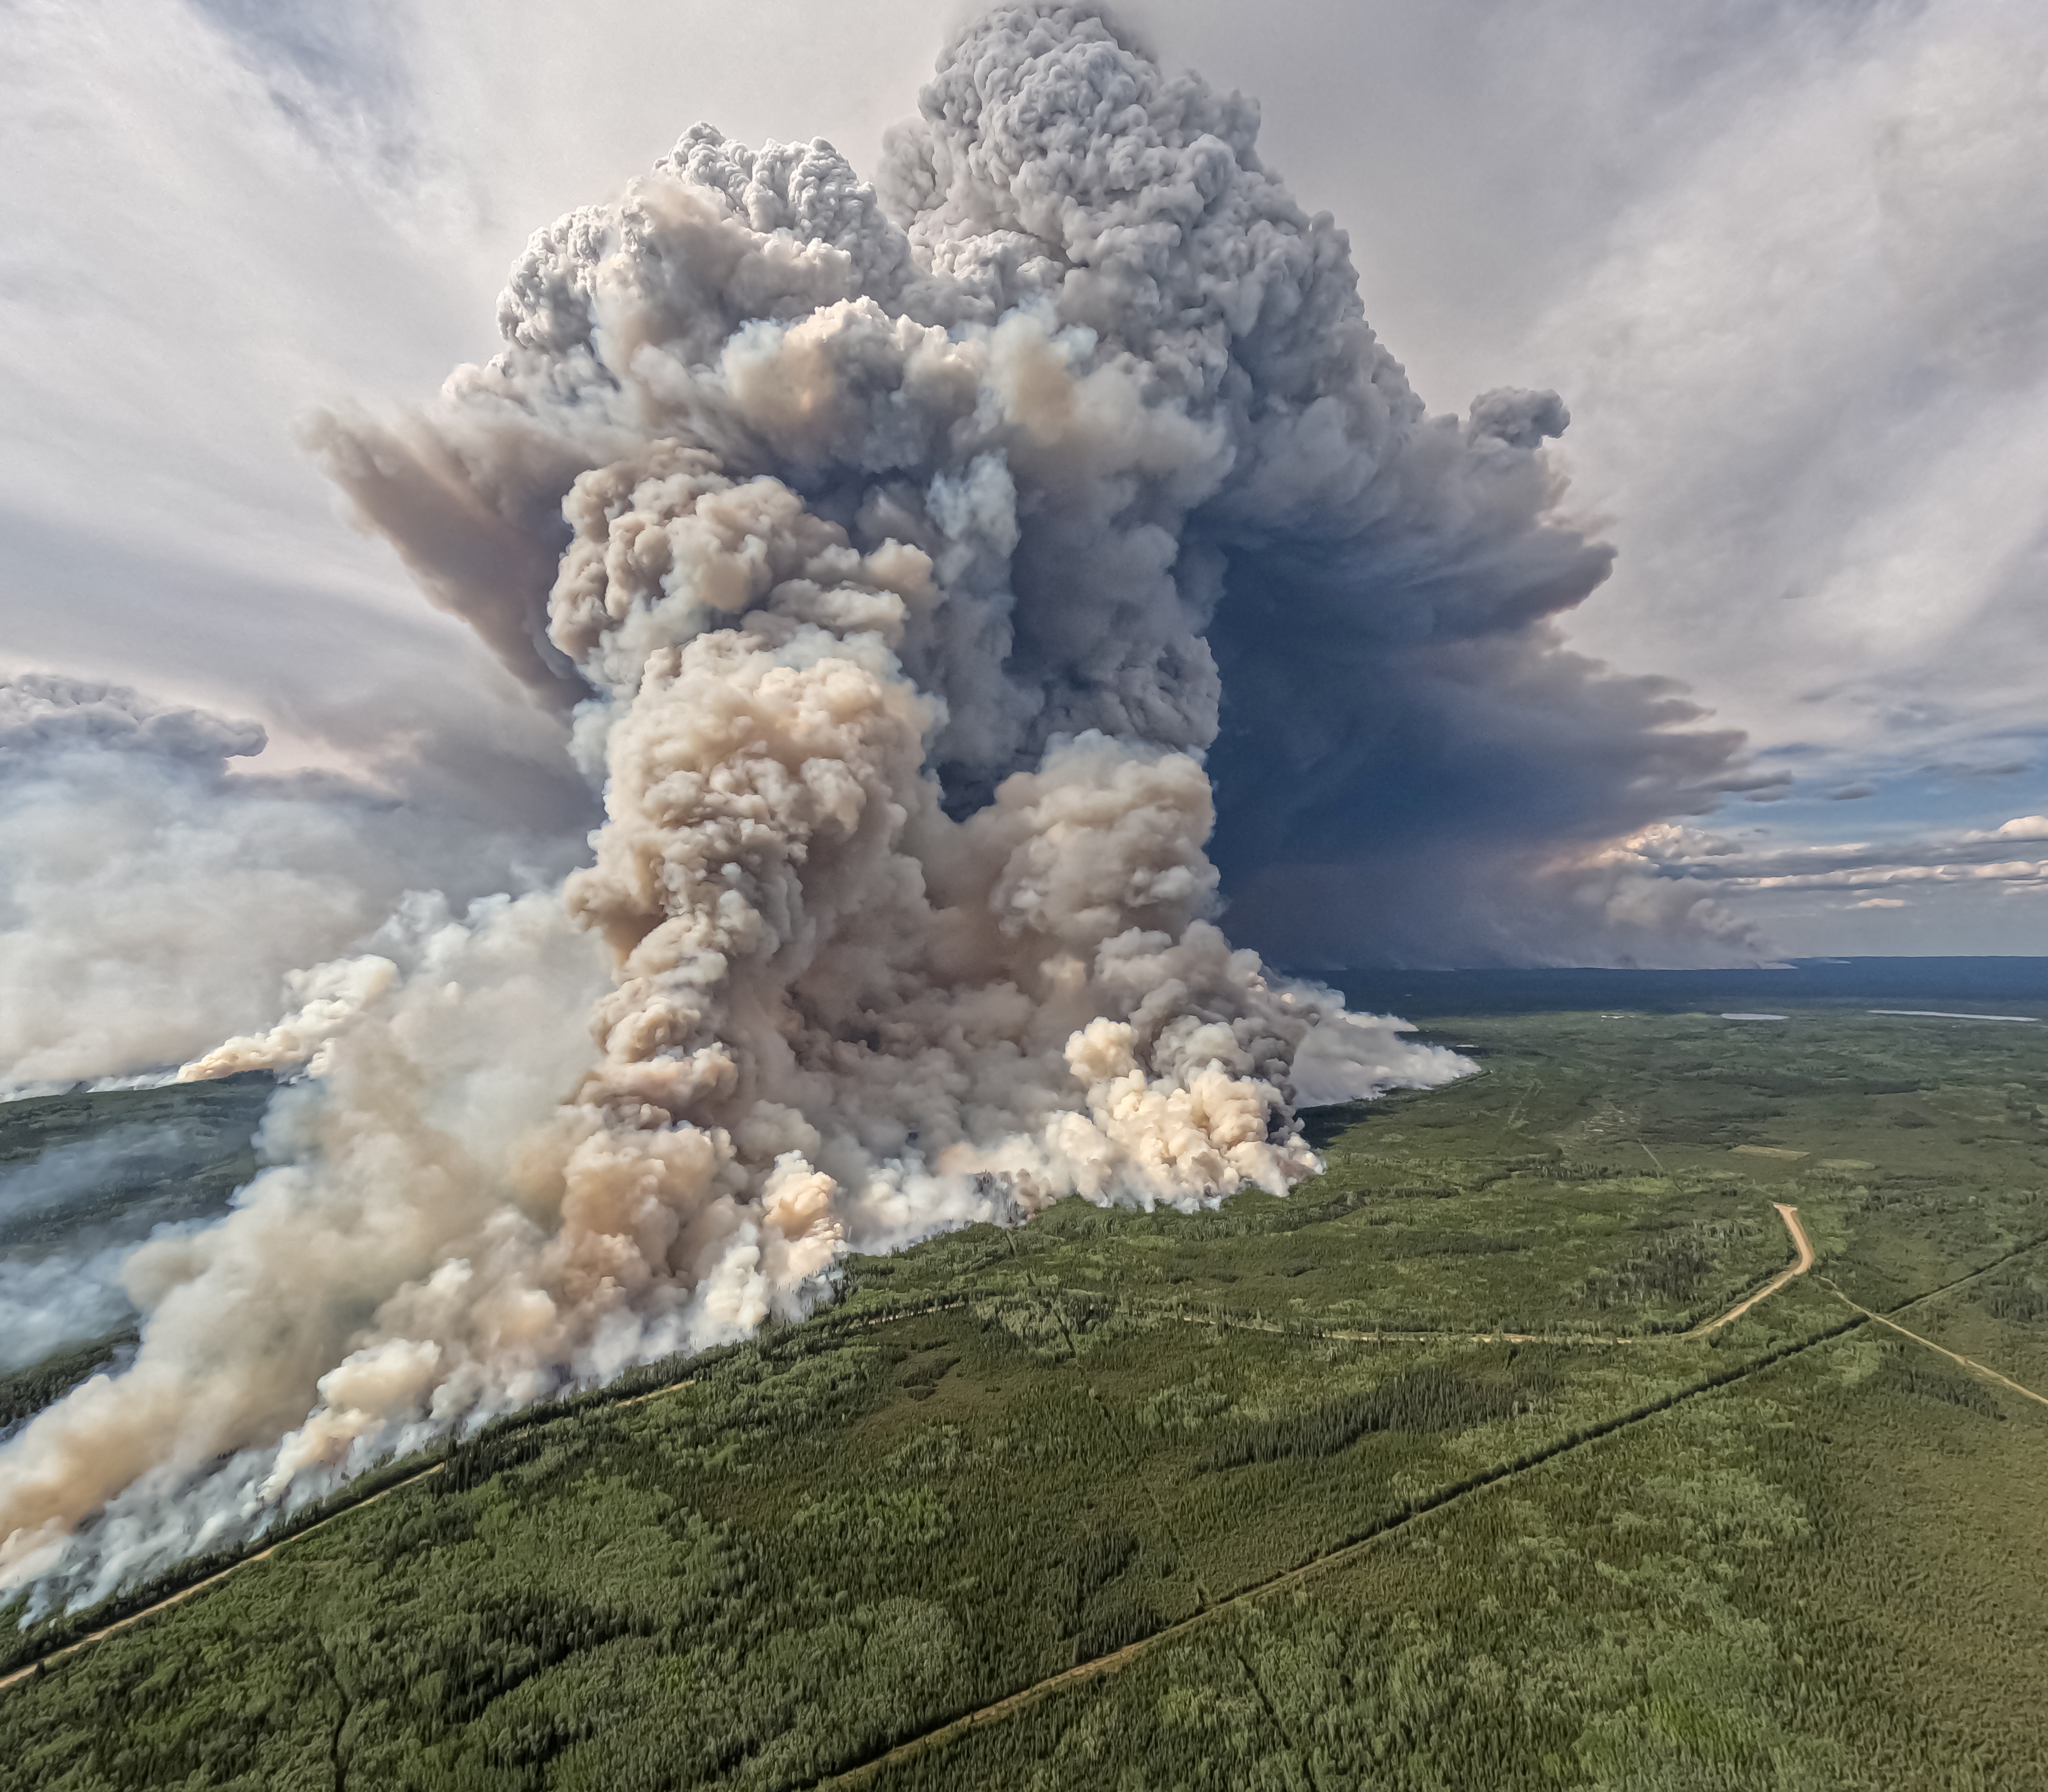 Smoke billows upwards from a planned ignition by firefighters tackling the Donnie Creek Complex wildfire south of Fort Nelson